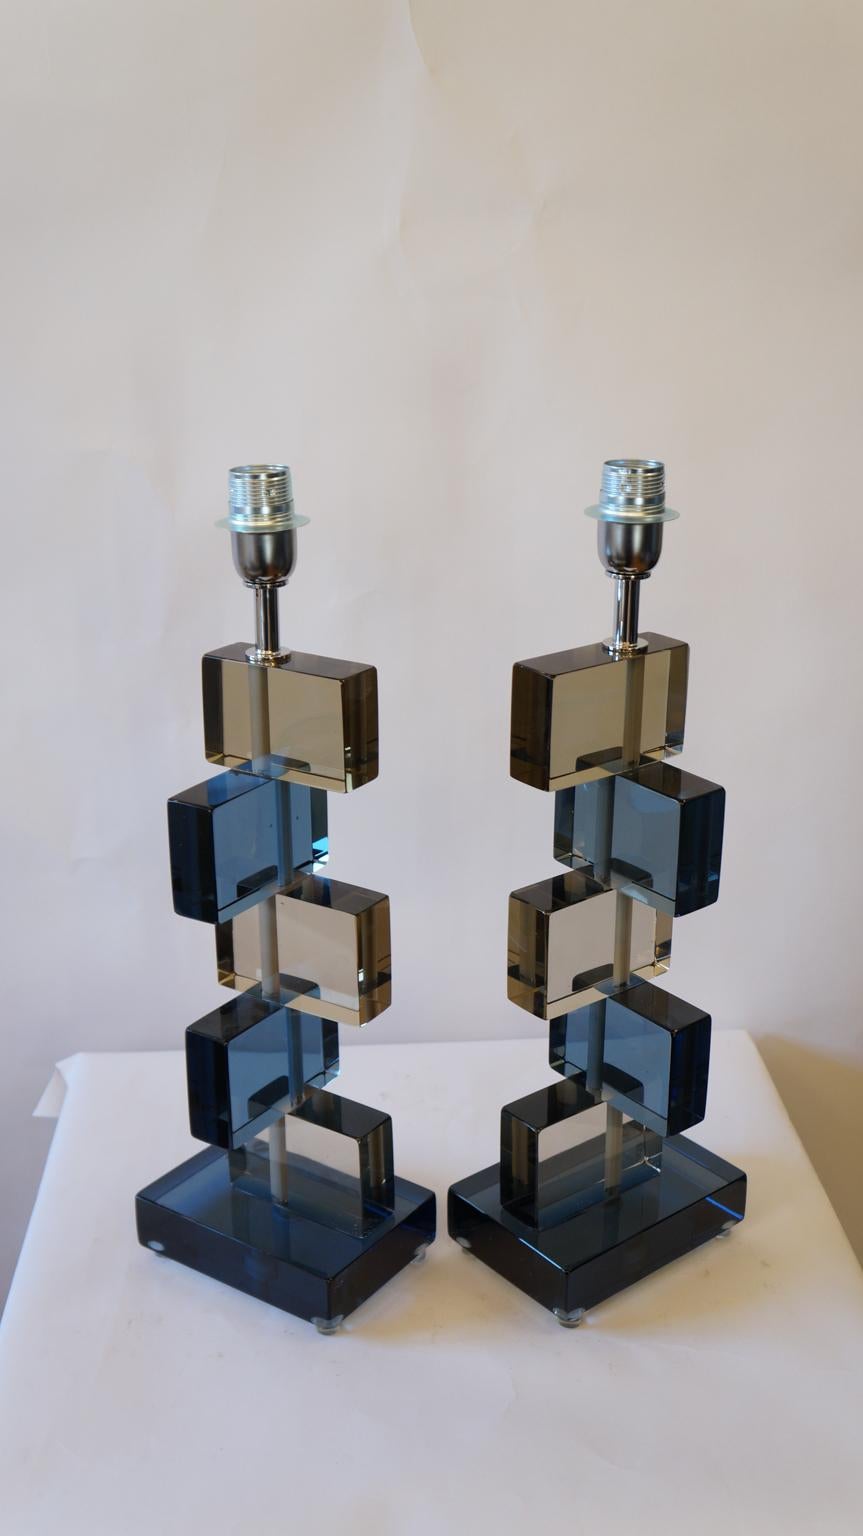 Two murano glass table lamps by Alberto Donà in 1975. 
In it we can see simplicity, elegance, linearity. It is, in fact, a simple model, and it is thanks to its colors that its beauty stands out. 
We note in fact the combination of blue and smoky,